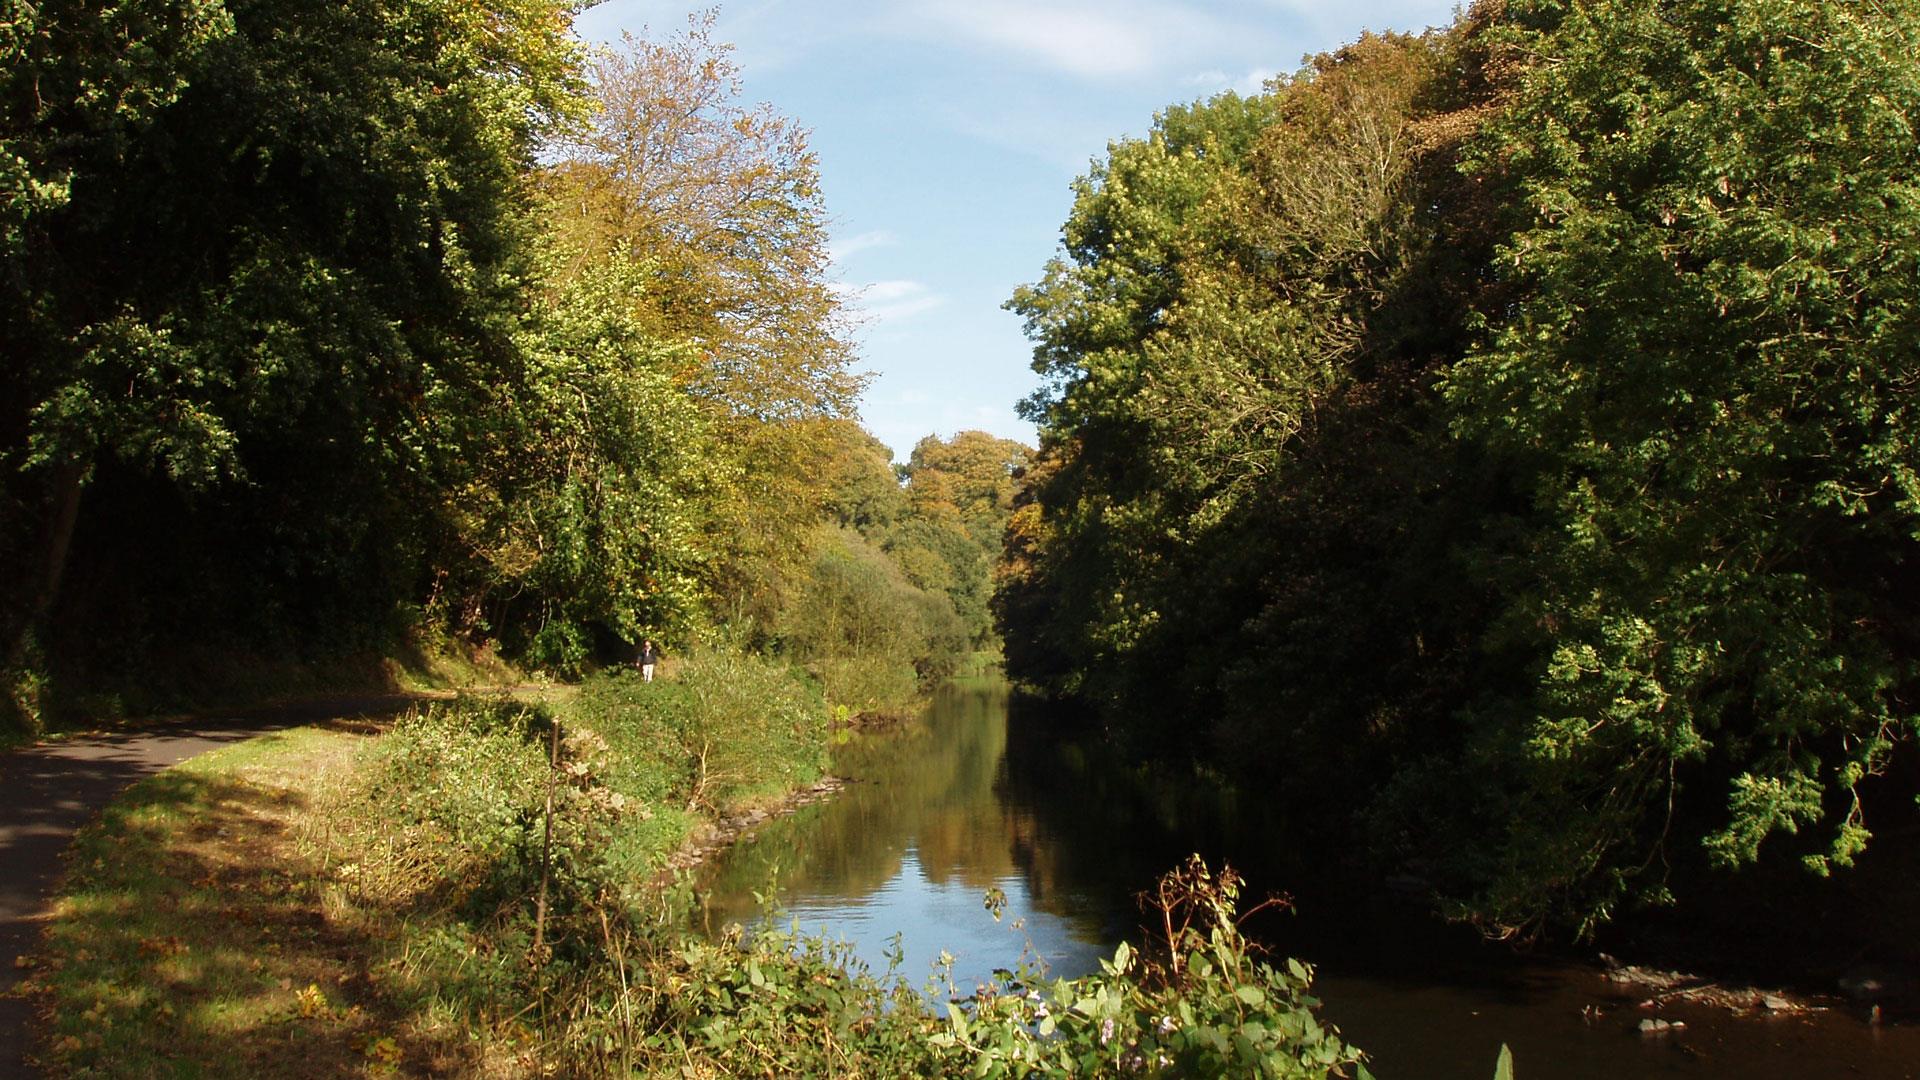 Image is of river and trees in the park